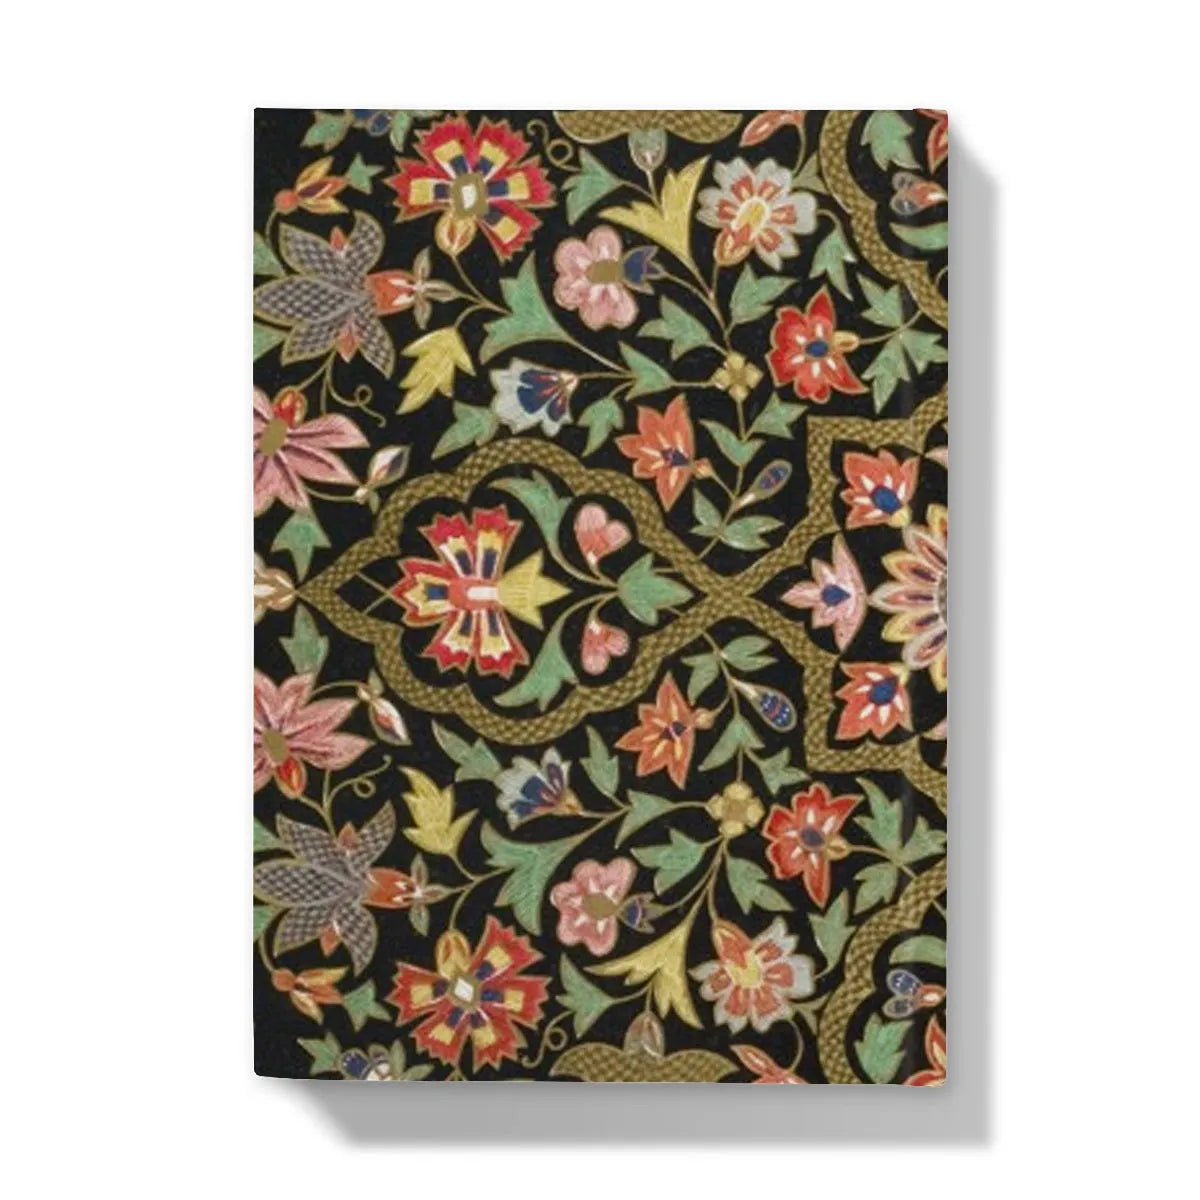 Indian Embroidery Hardback Journal - Notebooks & Notepads - Aesthetic Art